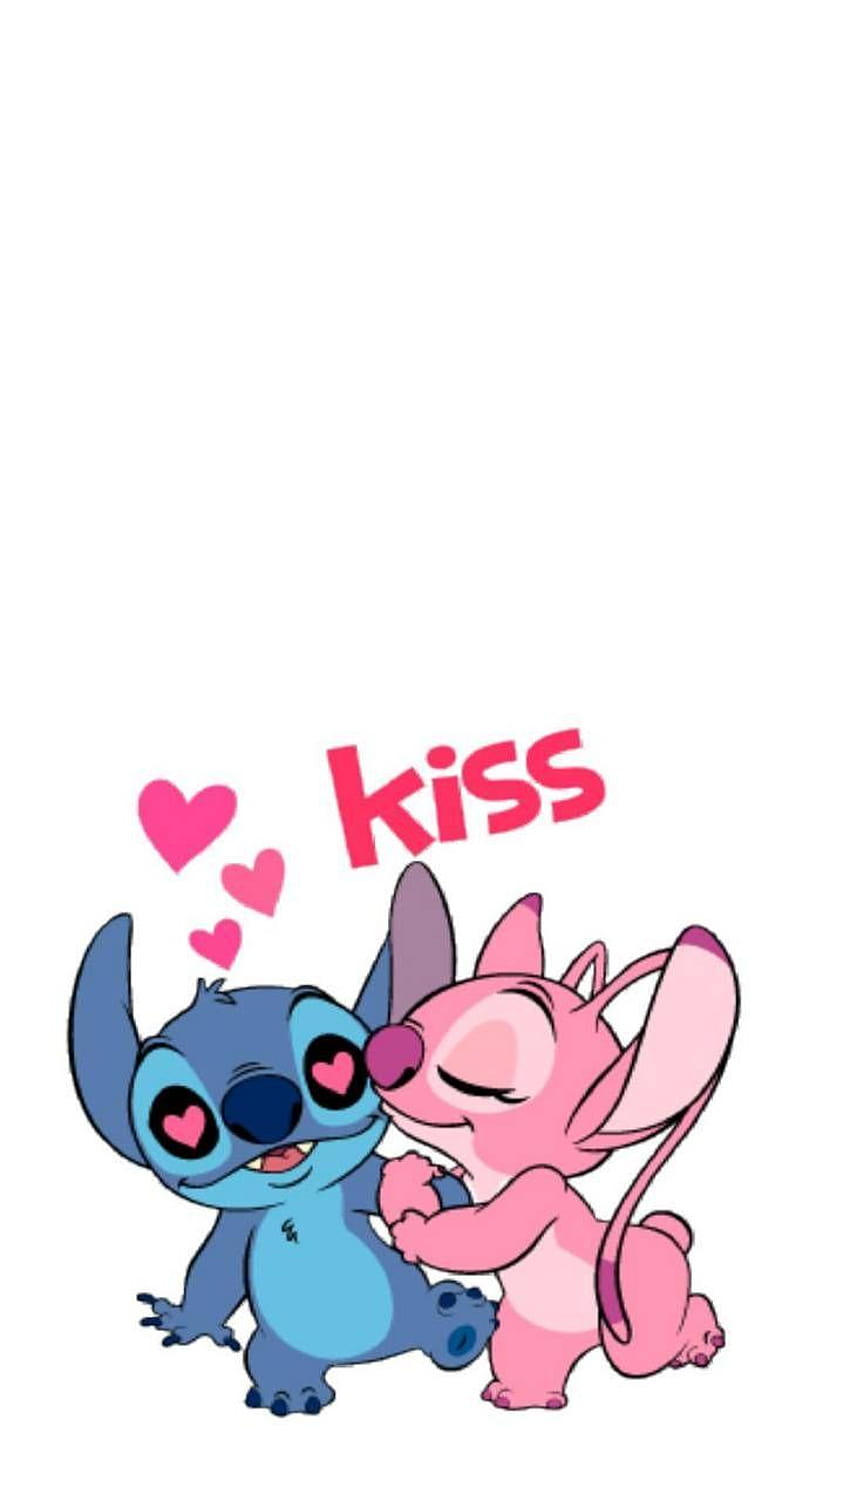 Stitch And Angel, stich and angel HD phone wallpaper